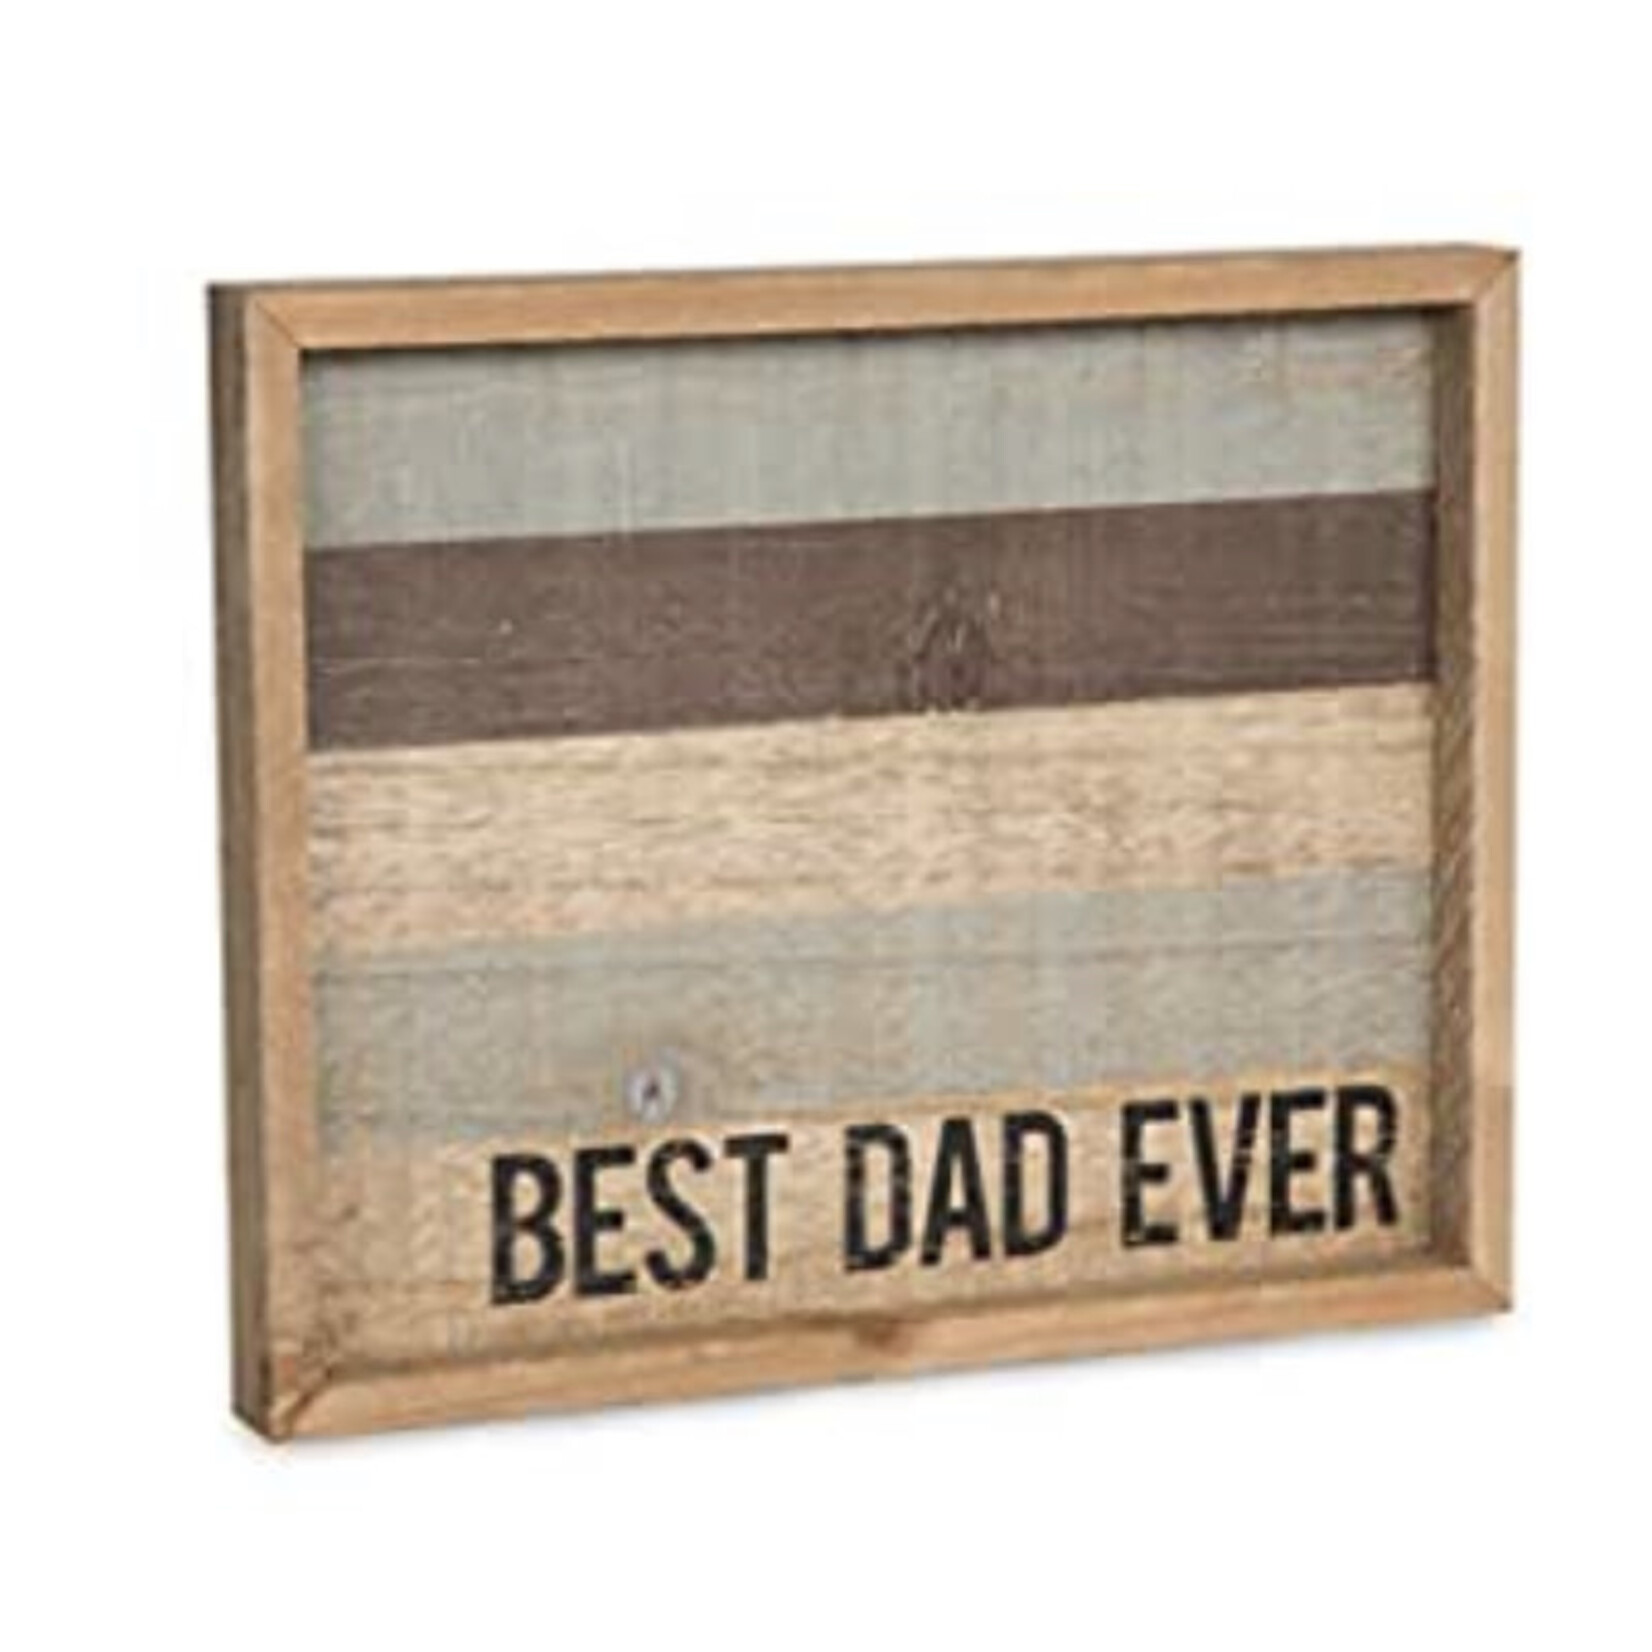 ManMade Best Dad Ever Wooden Tray